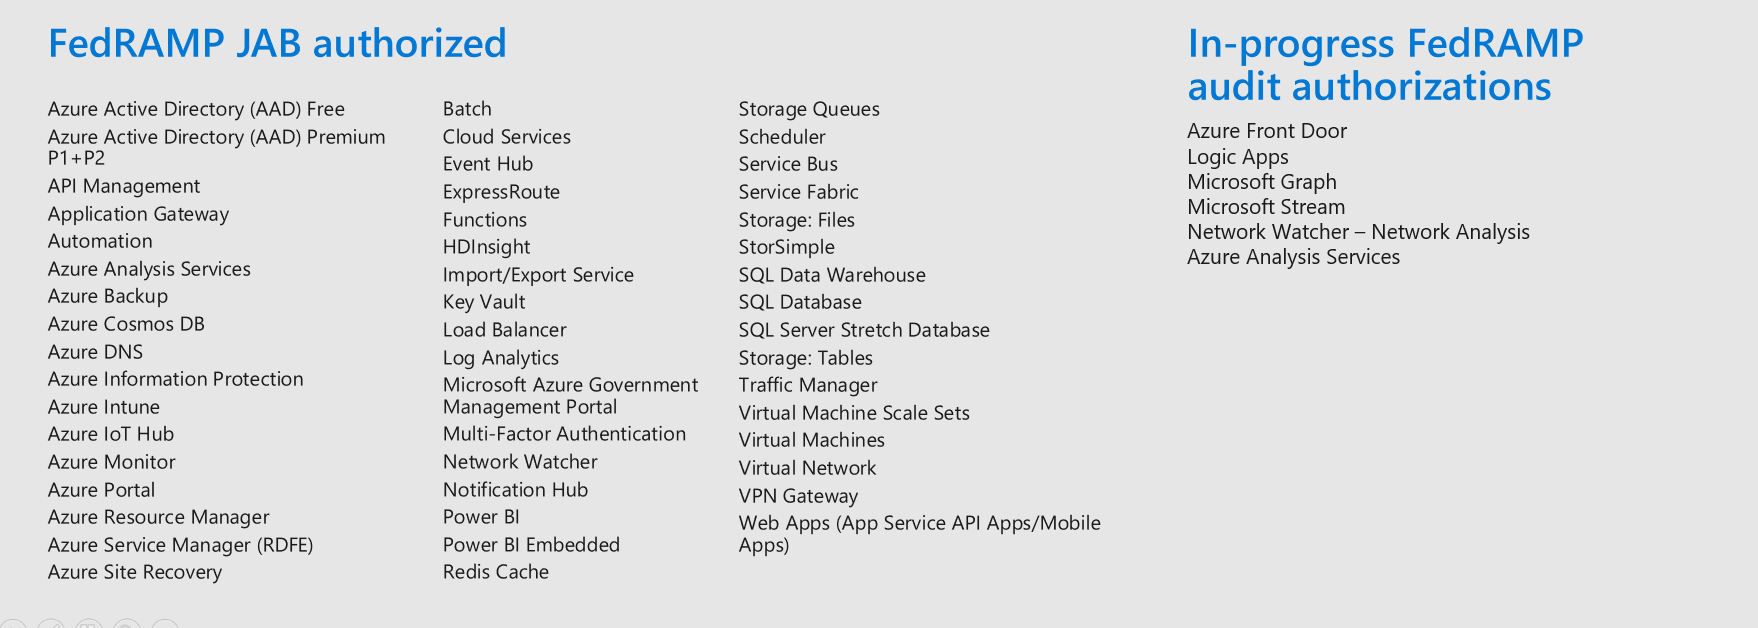 Overview of Azure Government compliance depth in terms of services offered.